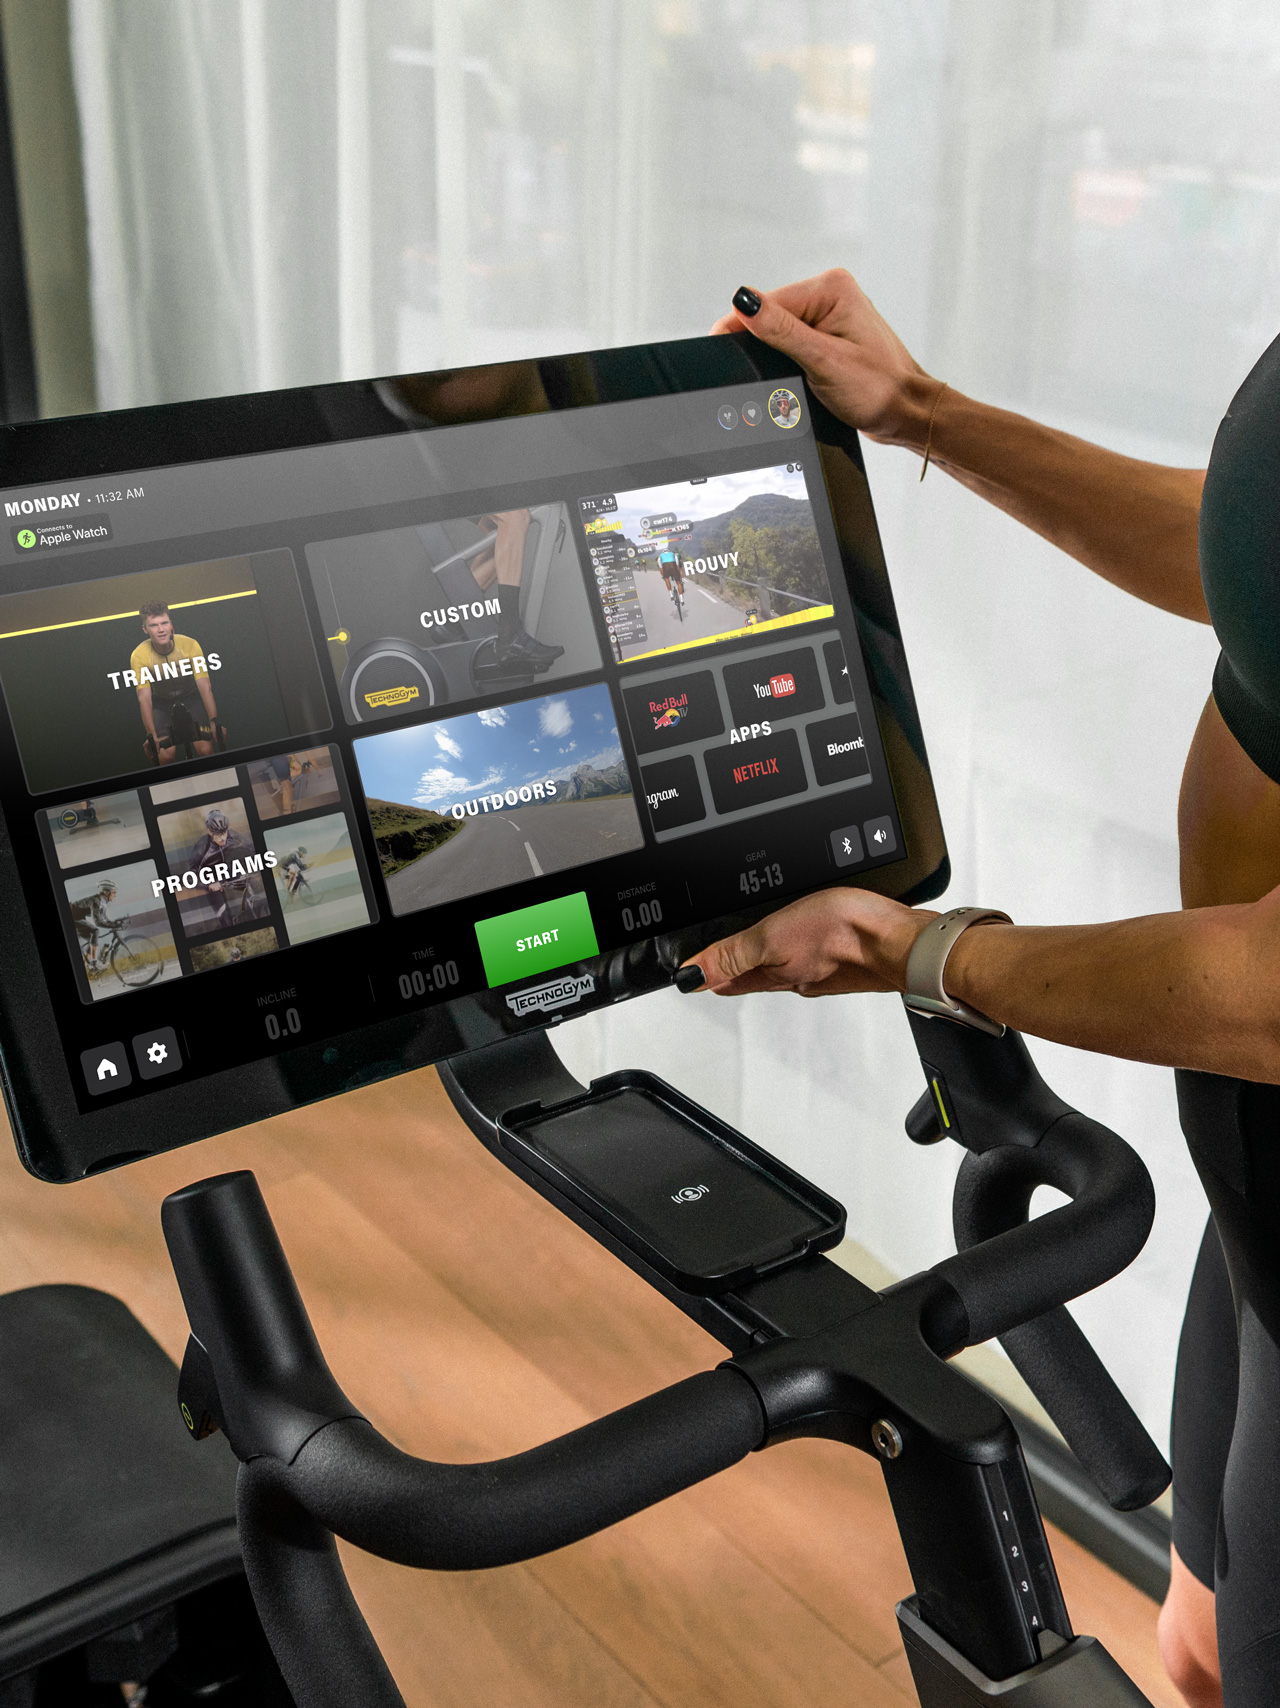 Technogym Ride: best smart bike for home and indoor cycling workouts